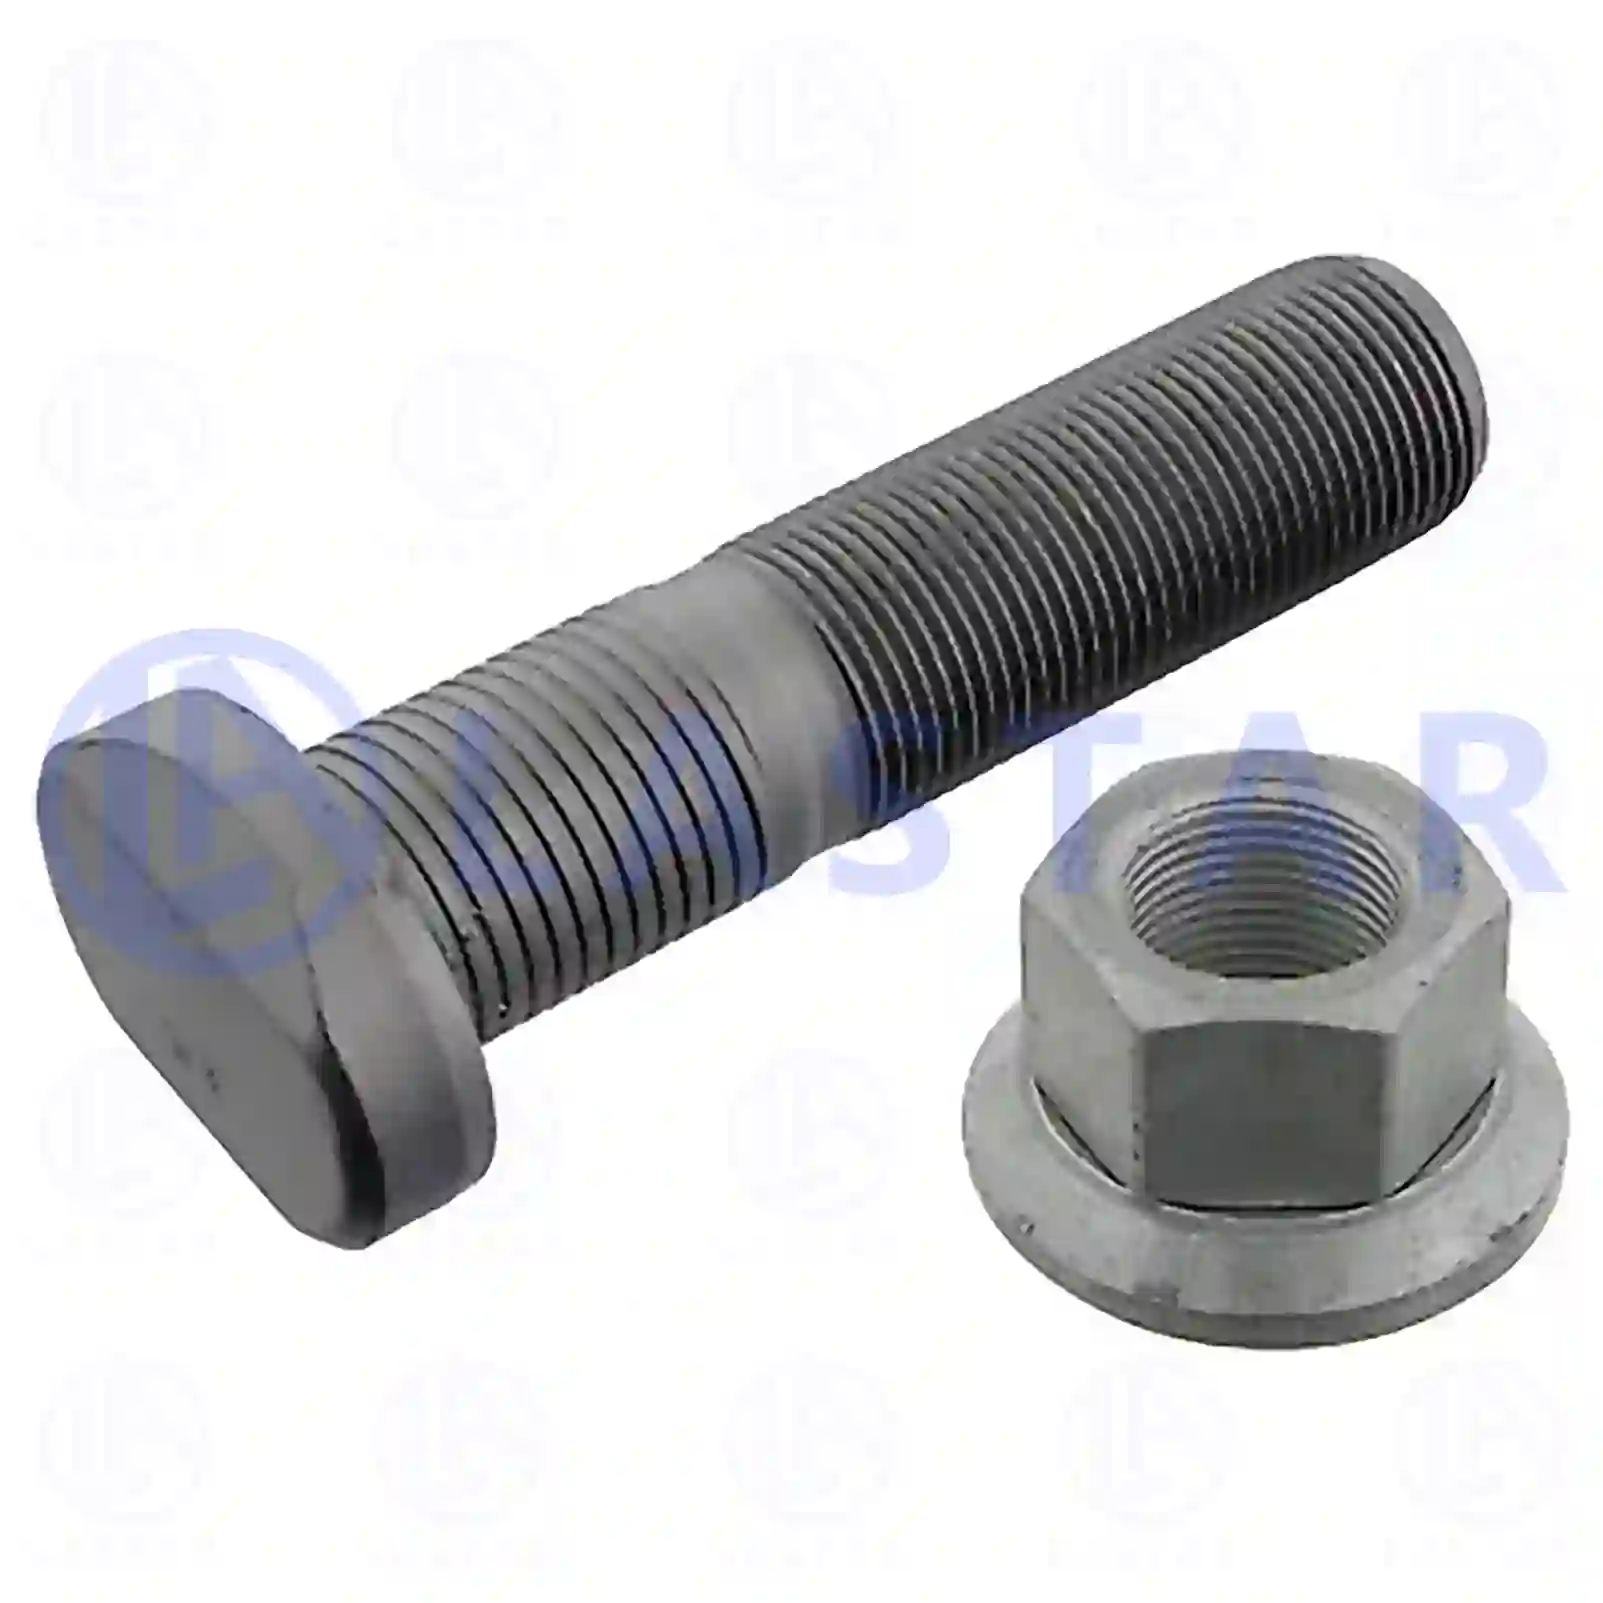 Wheel bolt, complete, 77726456, 0004014171S1, , , , , ||  77726456 Lastar Spare Part | Truck Spare Parts, Auotomotive Spare Parts Wheel bolt, complete, 77726456, 0004014171S1, , , , , ||  77726456 Lastar Spare Part | Truck Spare Parts, Auotomotive Spare Parts